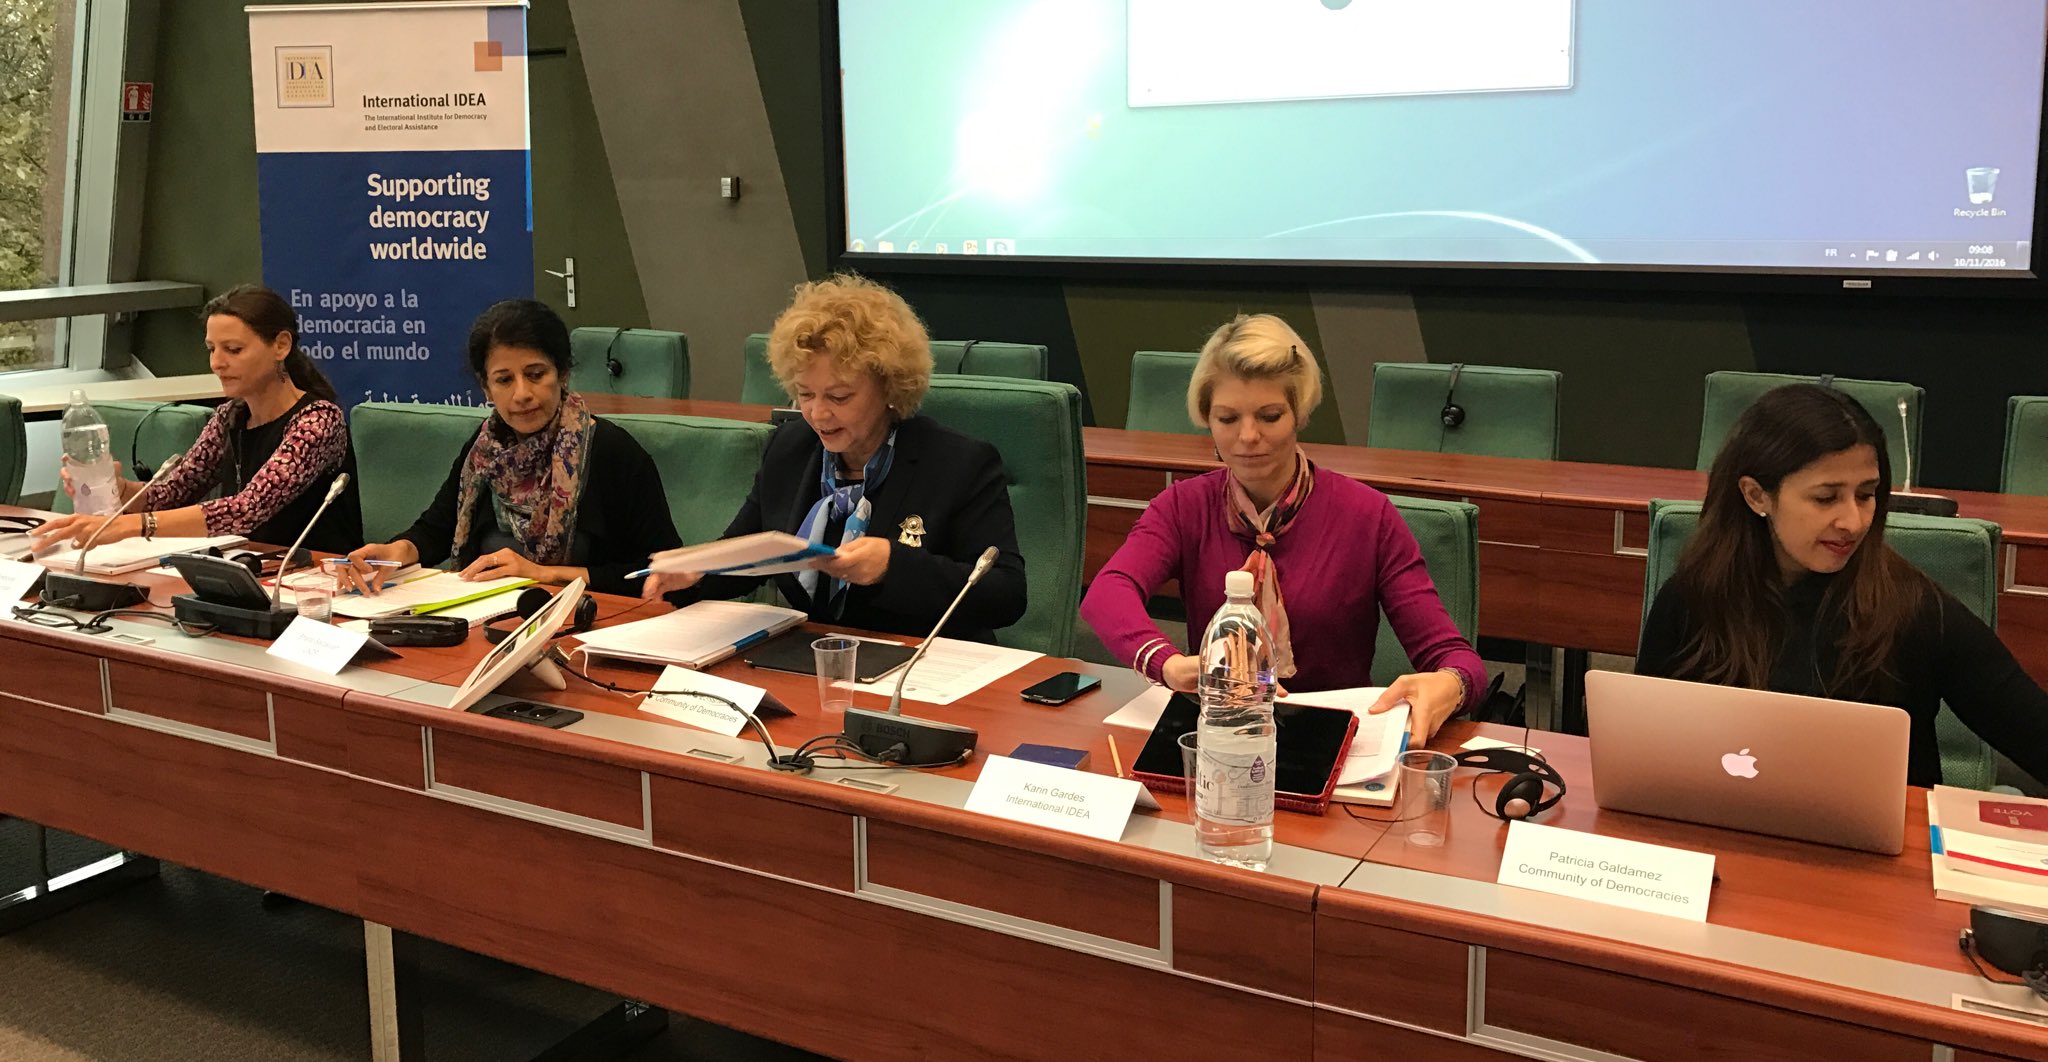 Panel of speakers at the European Consultation on Gender Equality and Political Empowerment on 10 November in Strasbourg, France